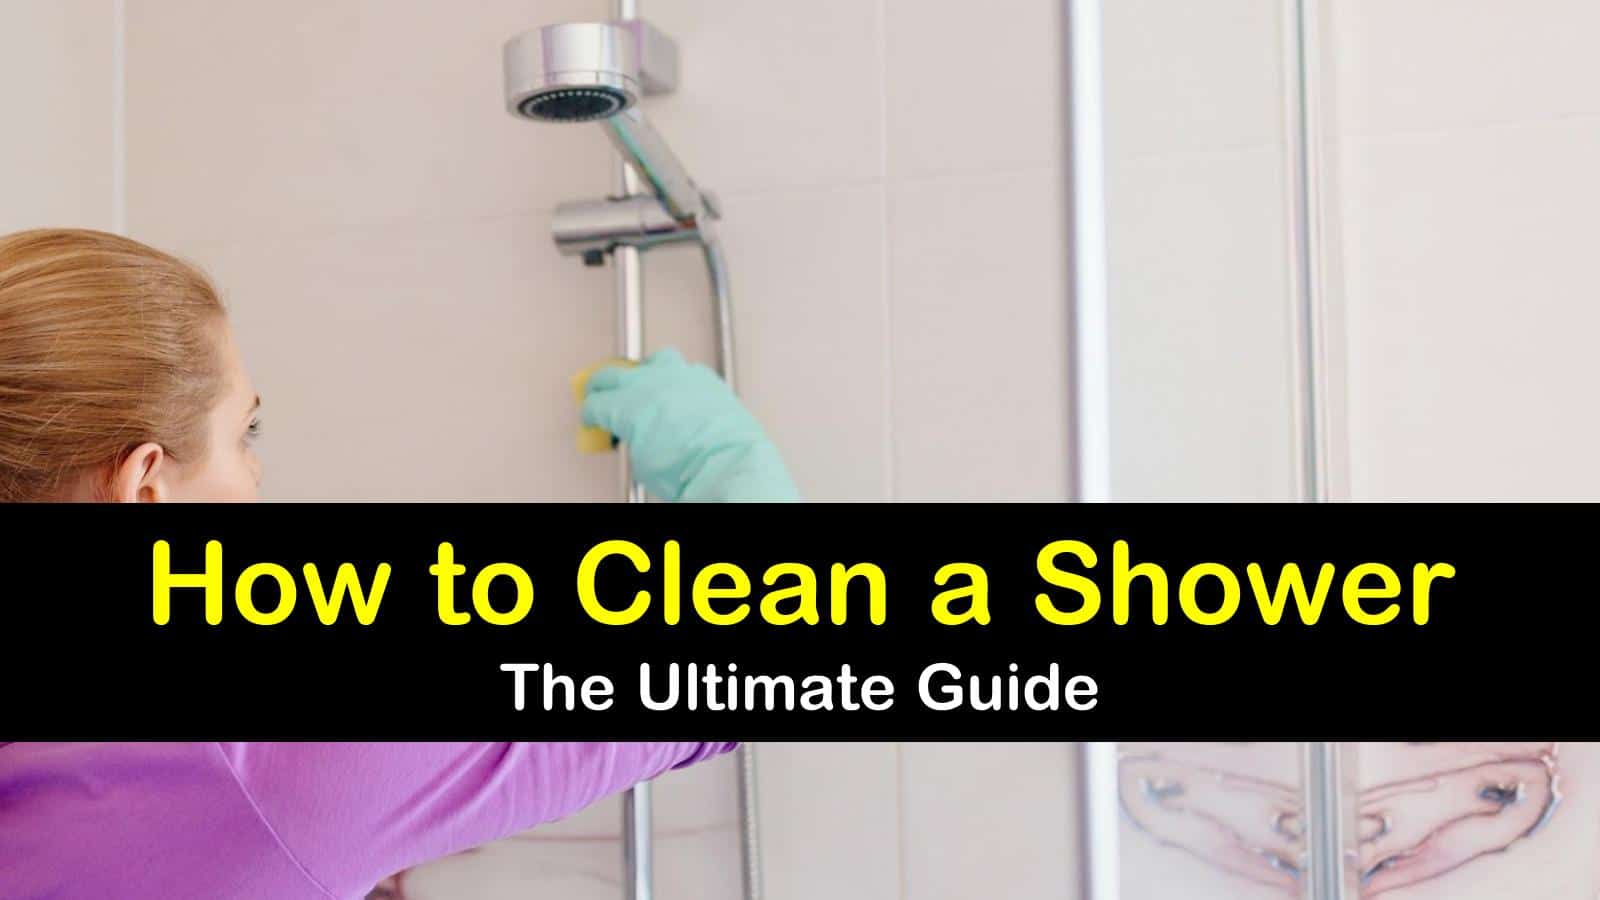 how to clean a shower titleimg1